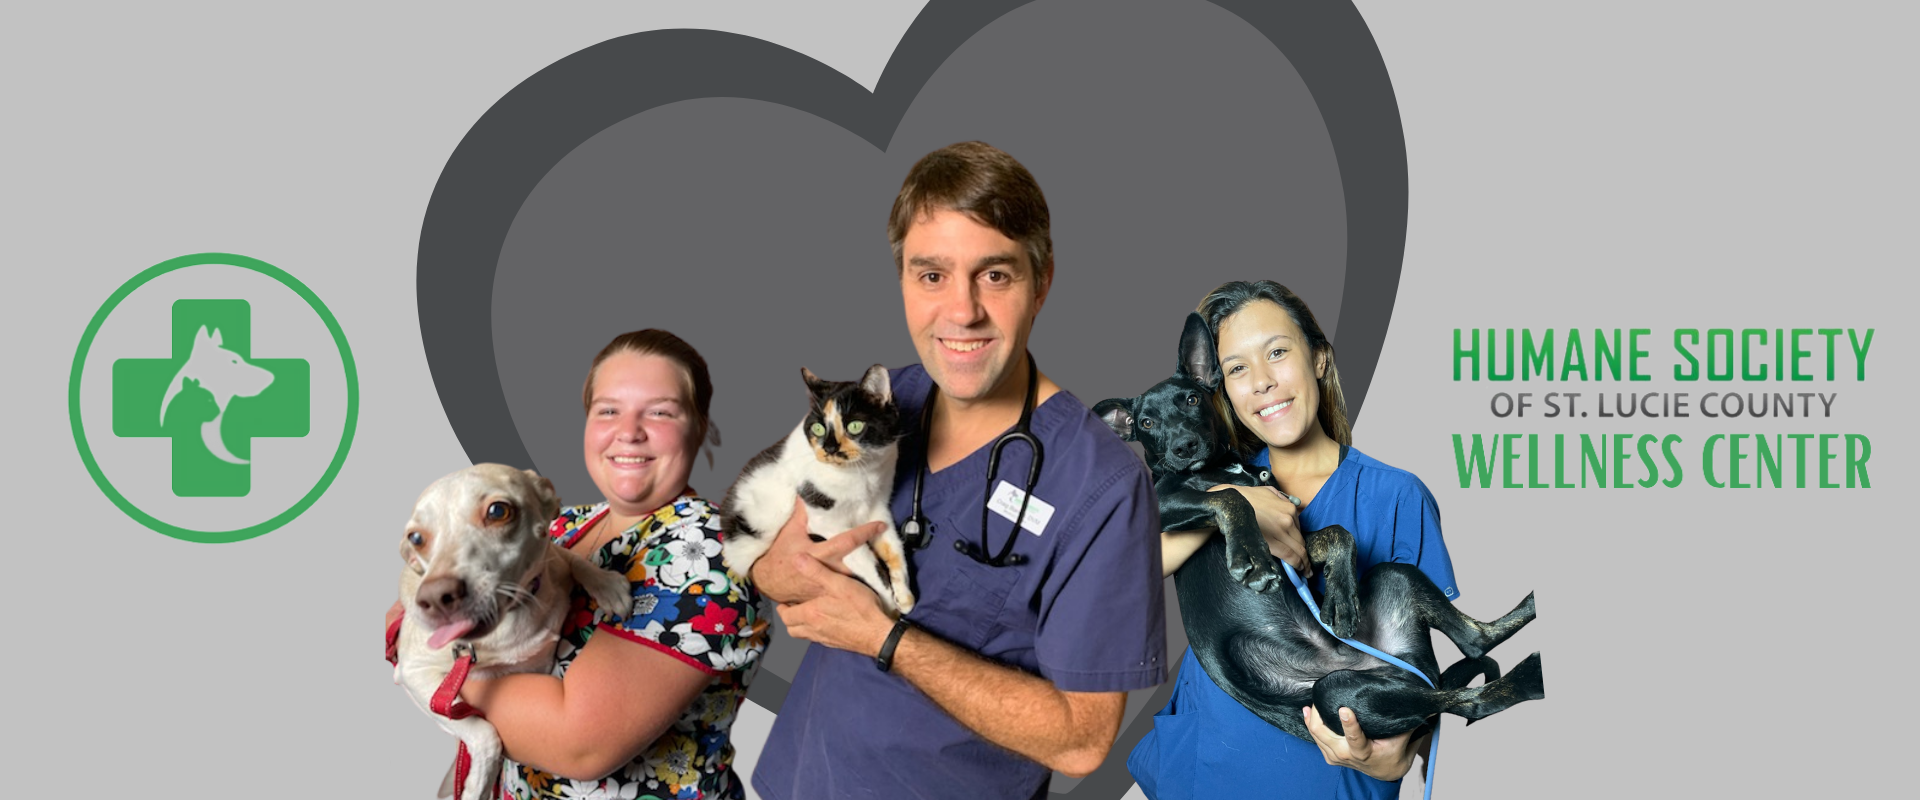 Dr. Stanton, veterinarian at the Humane Society of St. Lucie County wellness center